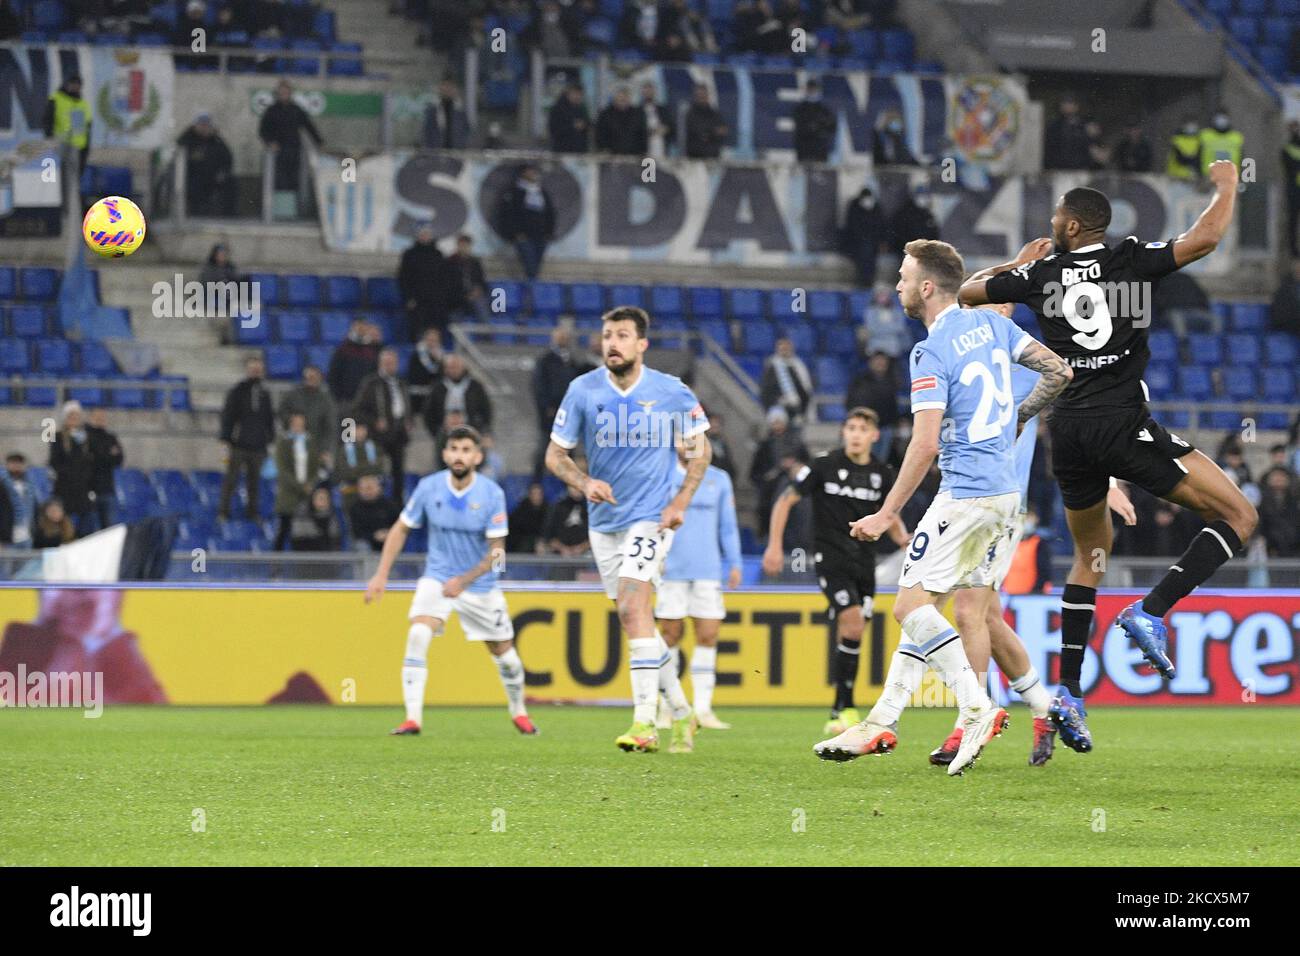 Norberto Bercique Gomes Betuncal (Udinese) gol 0-1 during the Italian Football Championship League A 2021/2022 match between SS Lazio vs Udinese Calcio at the Olimpic Stadium in Rome on 02 December 2021. (Photo by Fabrizio Corradetti/LiveMedia/NurPhoto) Stock Photo